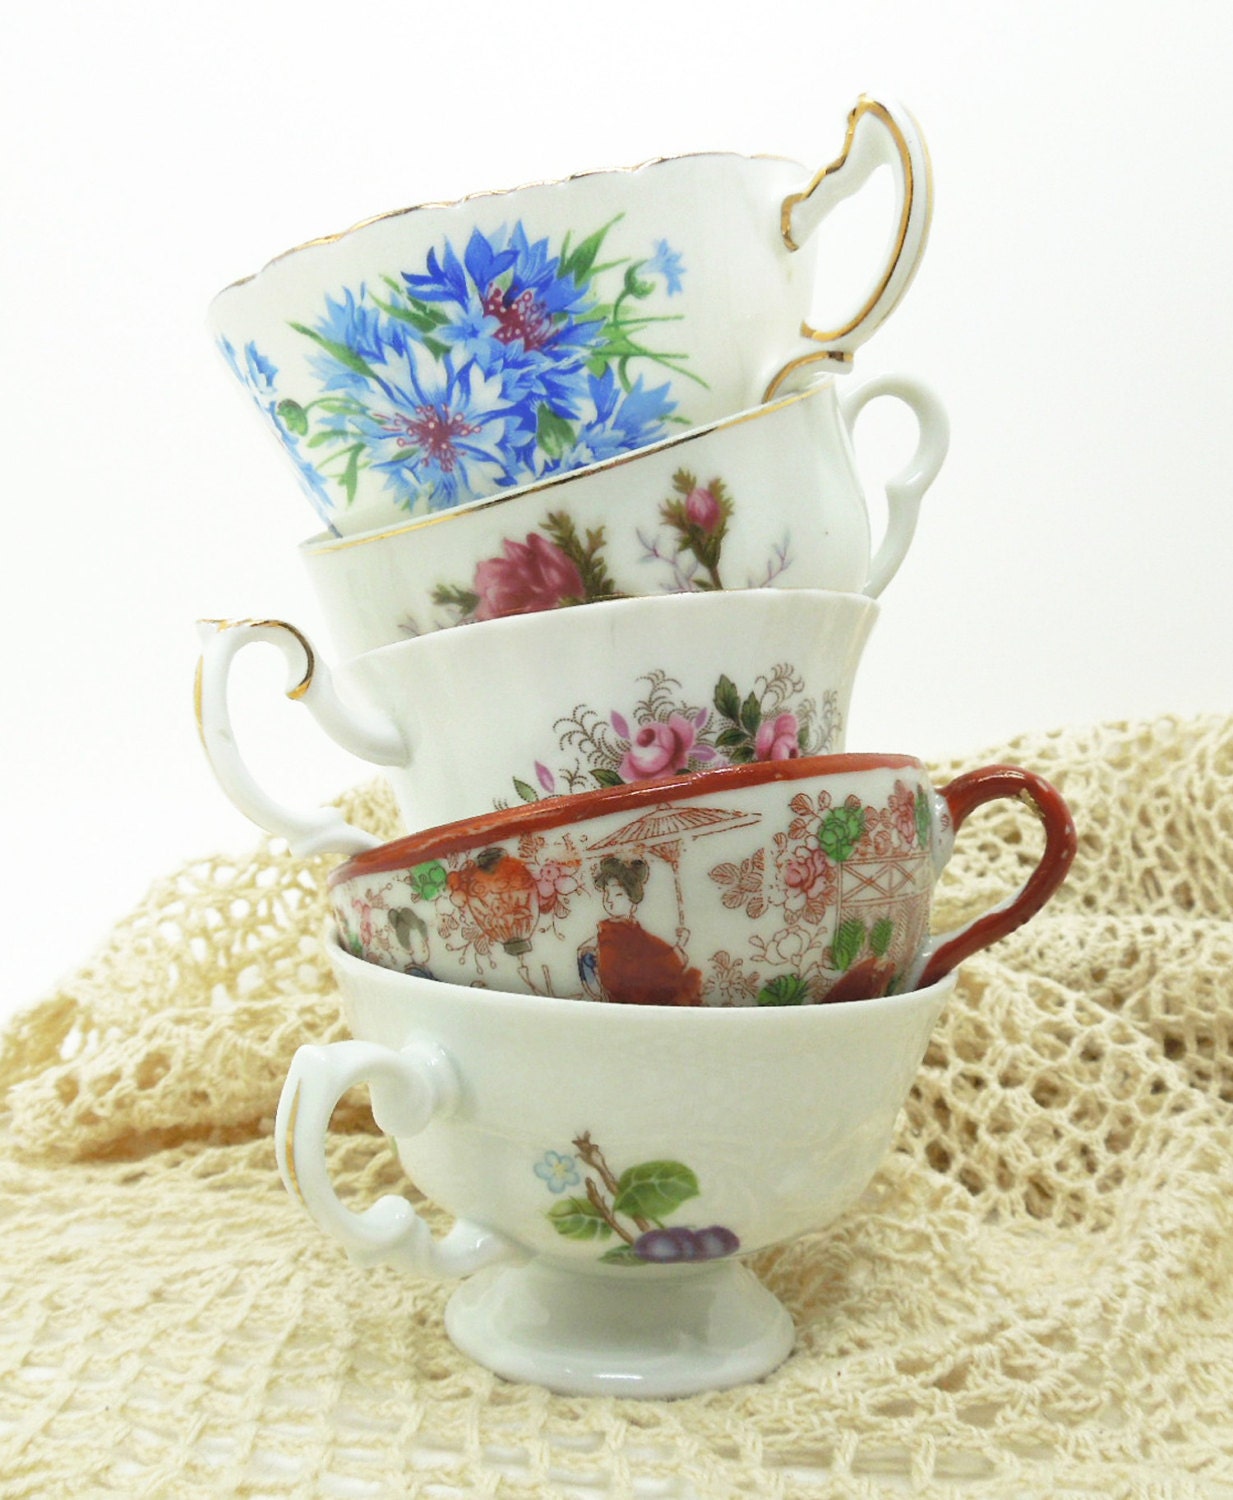 cups item your add favors favorites this revisit to favorited  to  like favorite vintage it tea